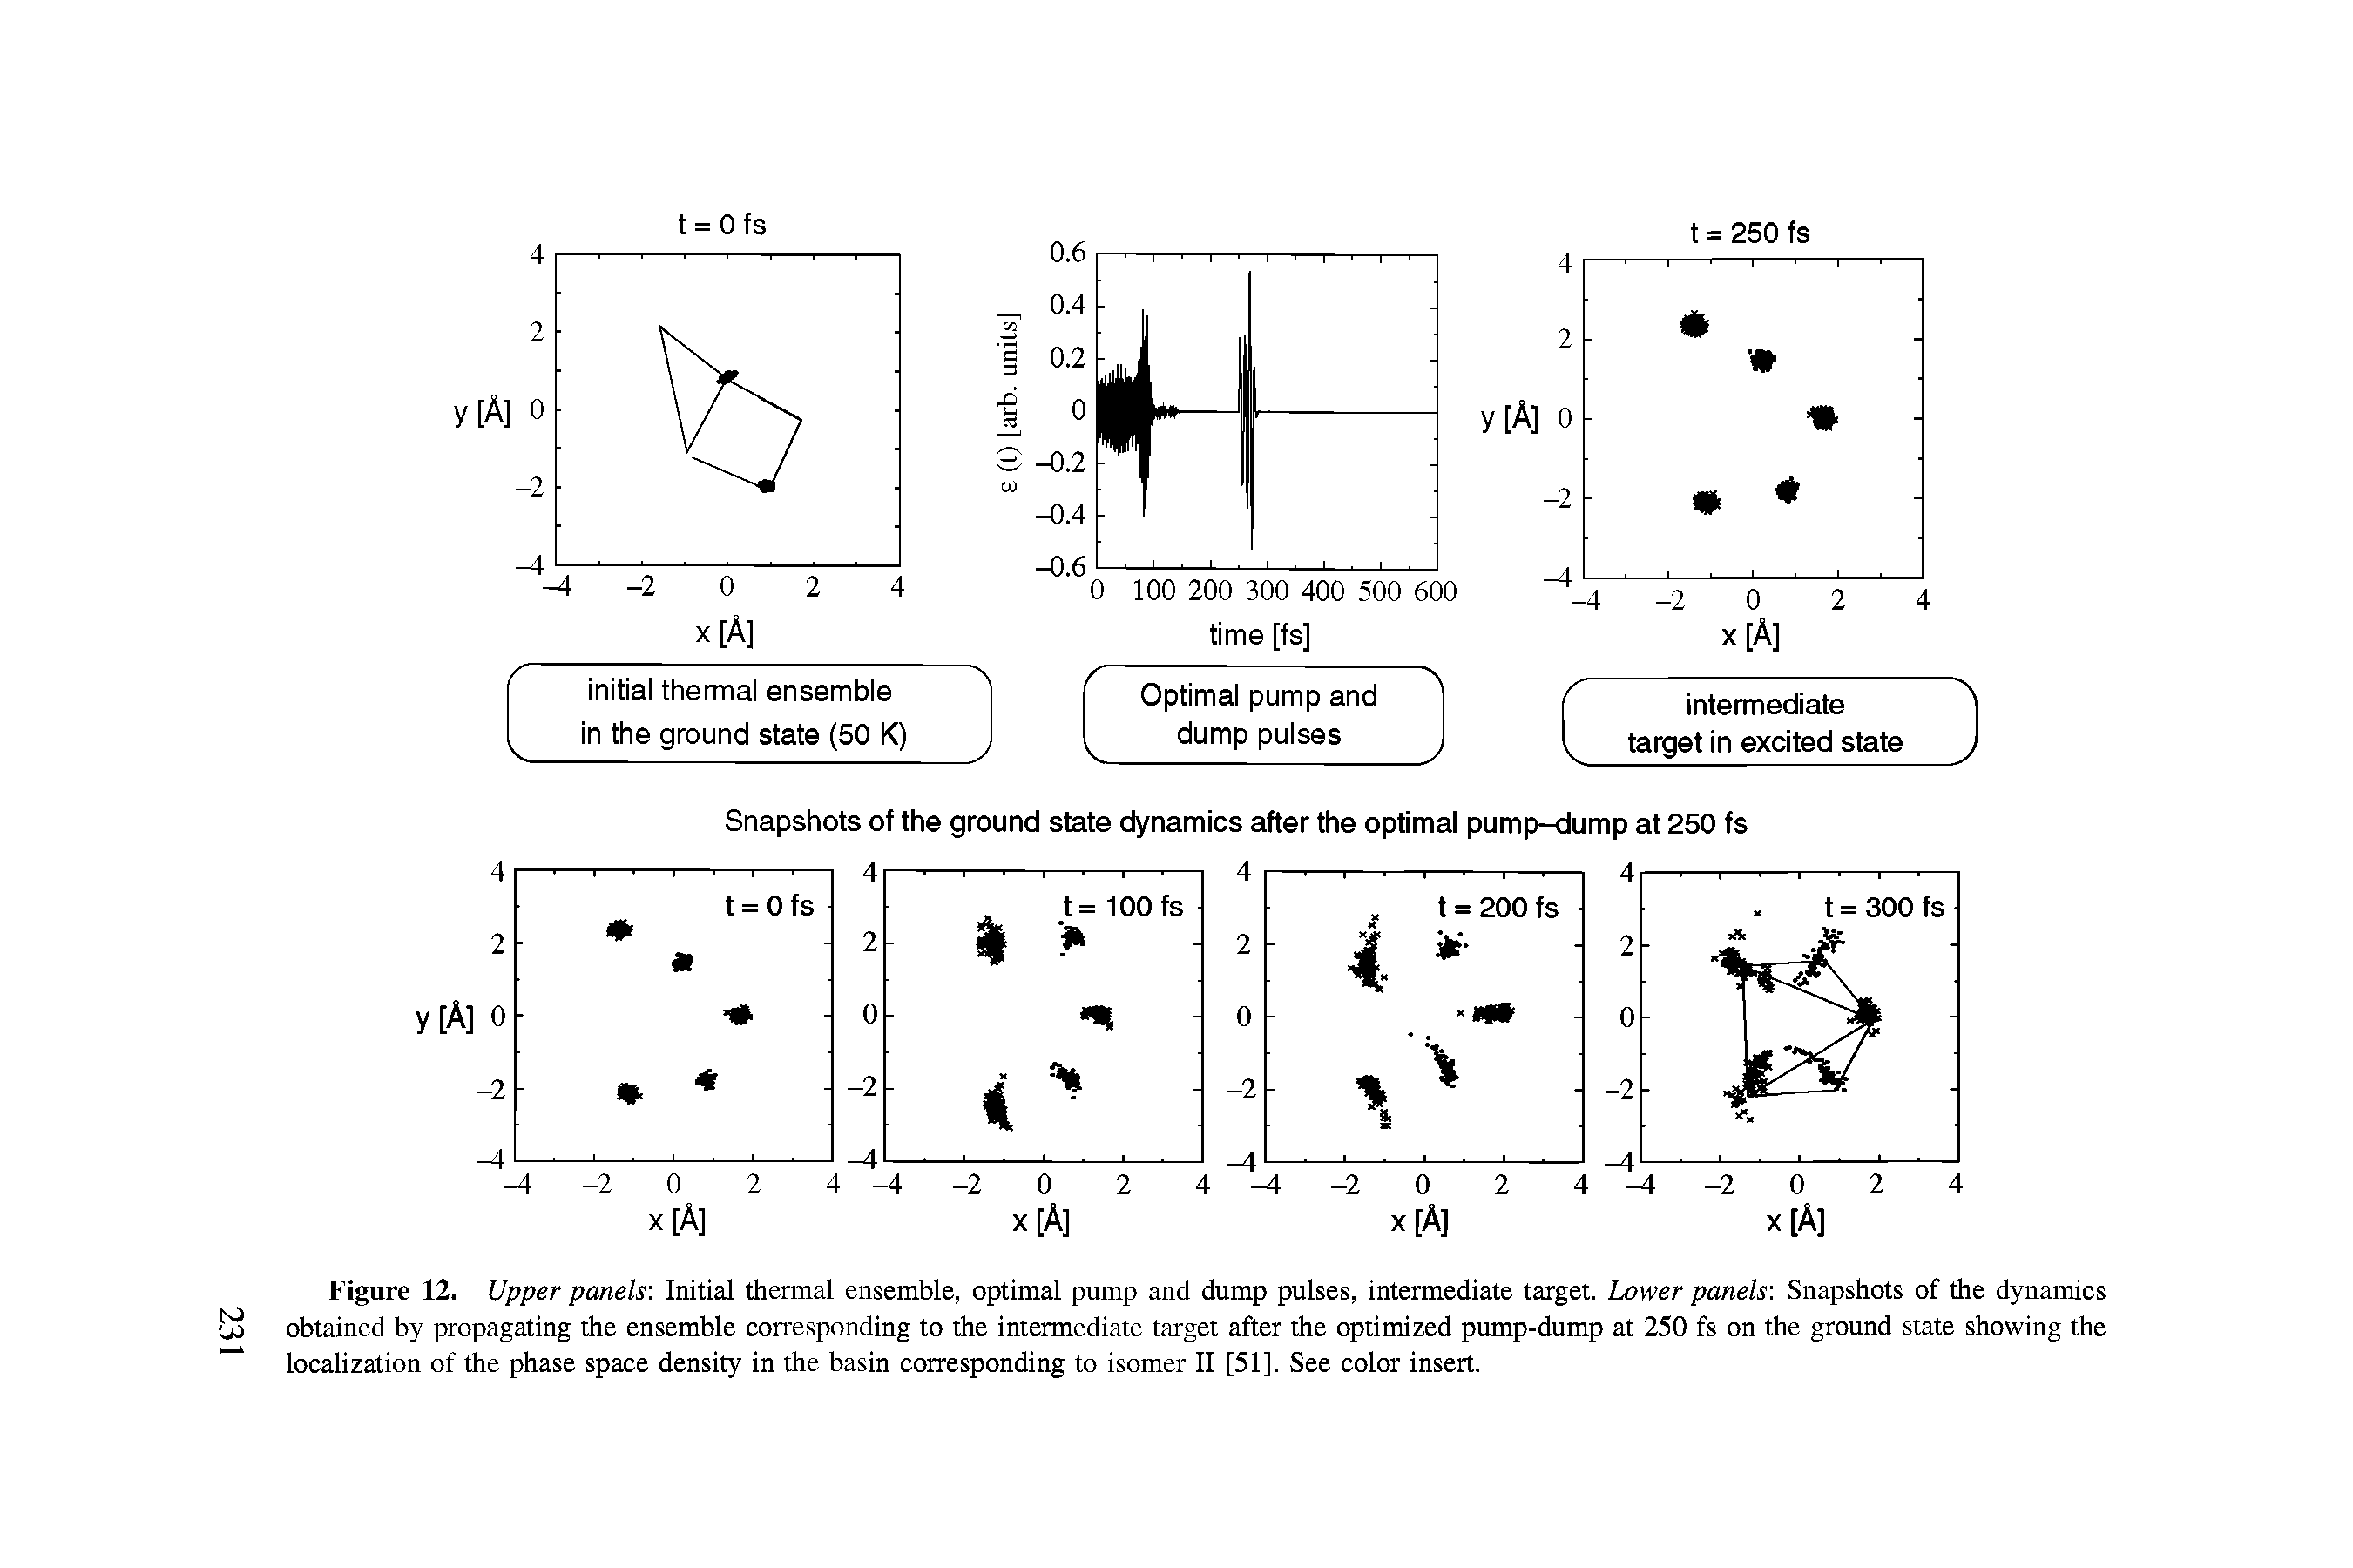 Figure 12. Upper panels. Initial thermal ensemble, optimal pump and dump pulses, intermediate target. Lower panels. Snapshots of the dynamics oj obtained by propagating the ensemble corresponding to the intermediate target after the optimized pump-dump at 250 fs on the ground state showing the localization of the phase space density in the basin corresponding to isomer II [51]. See color insert.